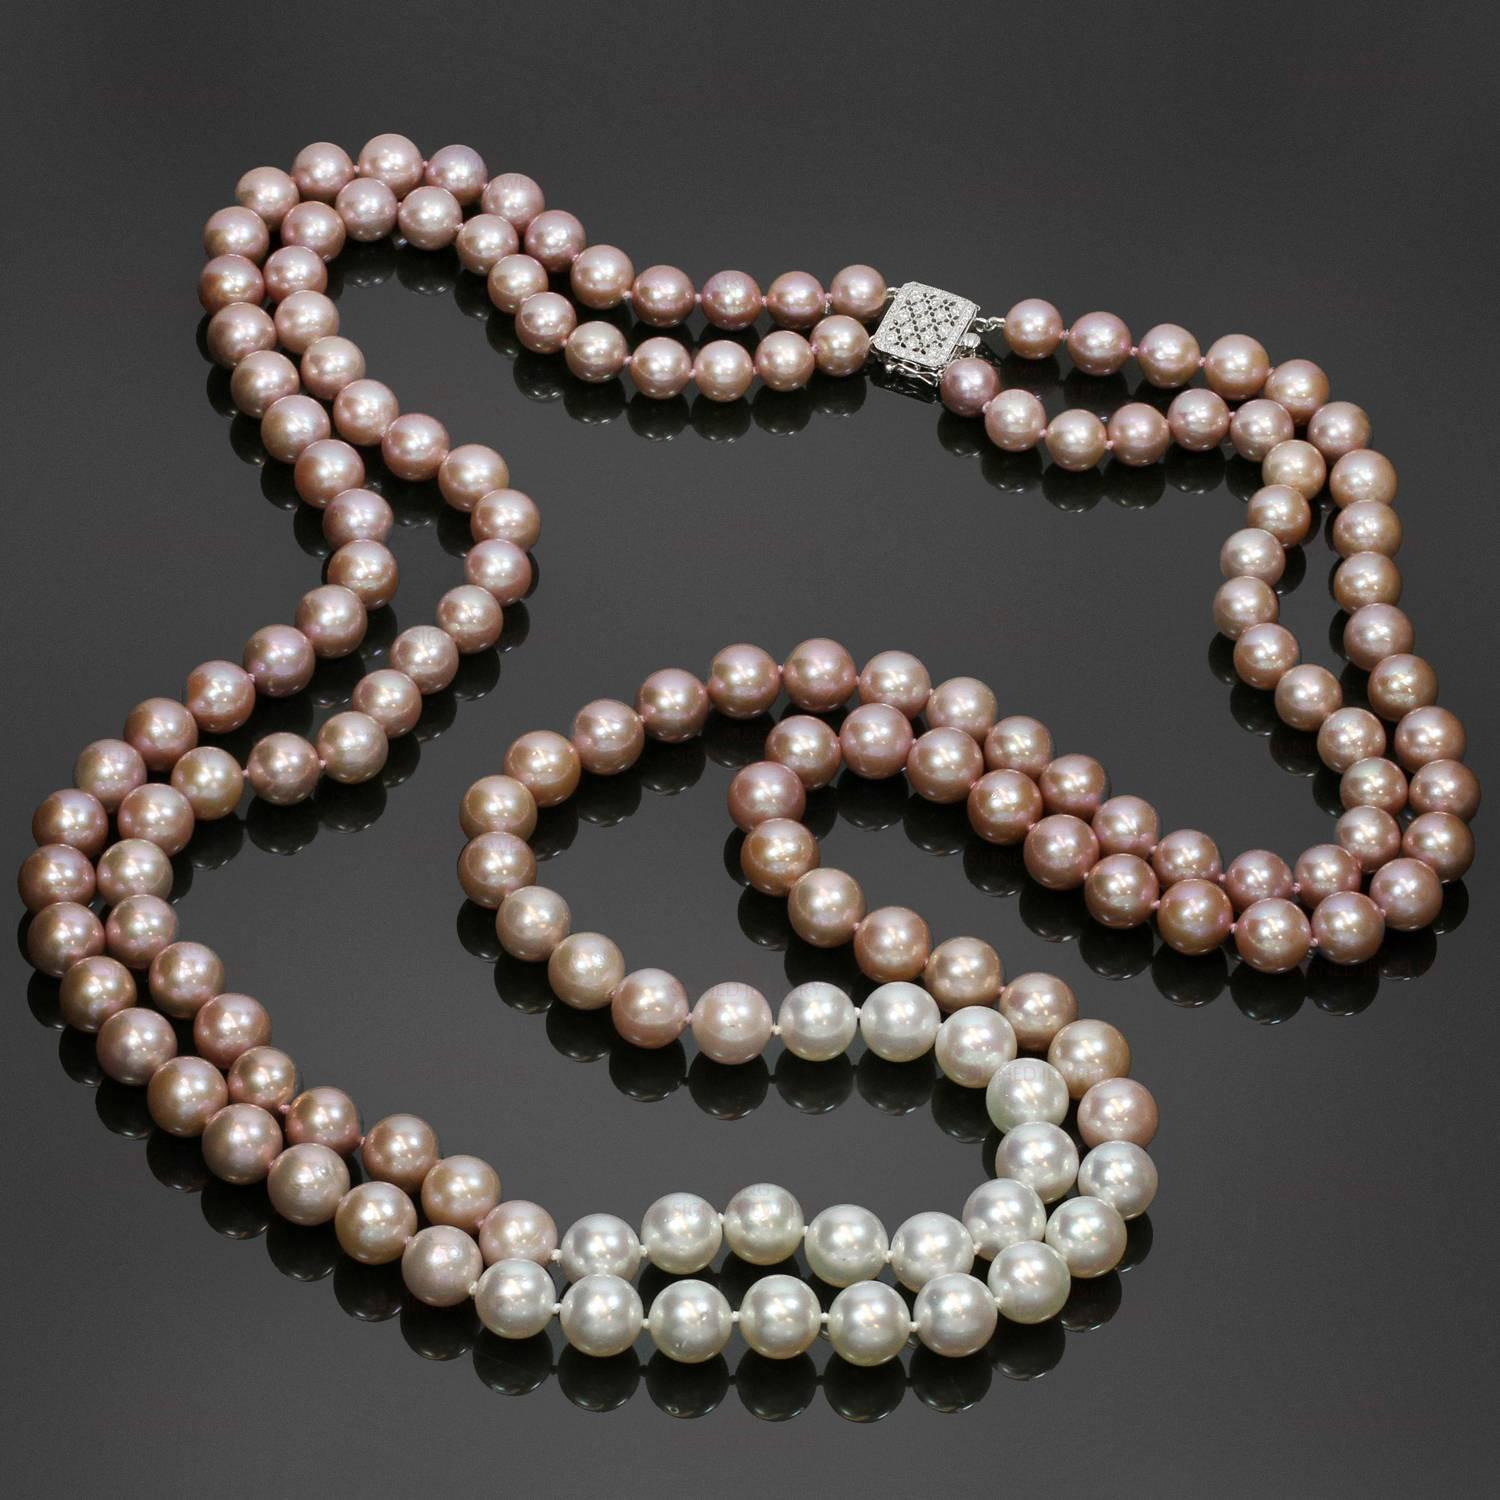 This gorgeous double-strand opera necklace features a stunning selection of South Sea Cultured Pearls and Freshwater Cultured Pearls - 155 very shiny pearls with high luster and intense even pink color. The necklace is completed with a sparkling